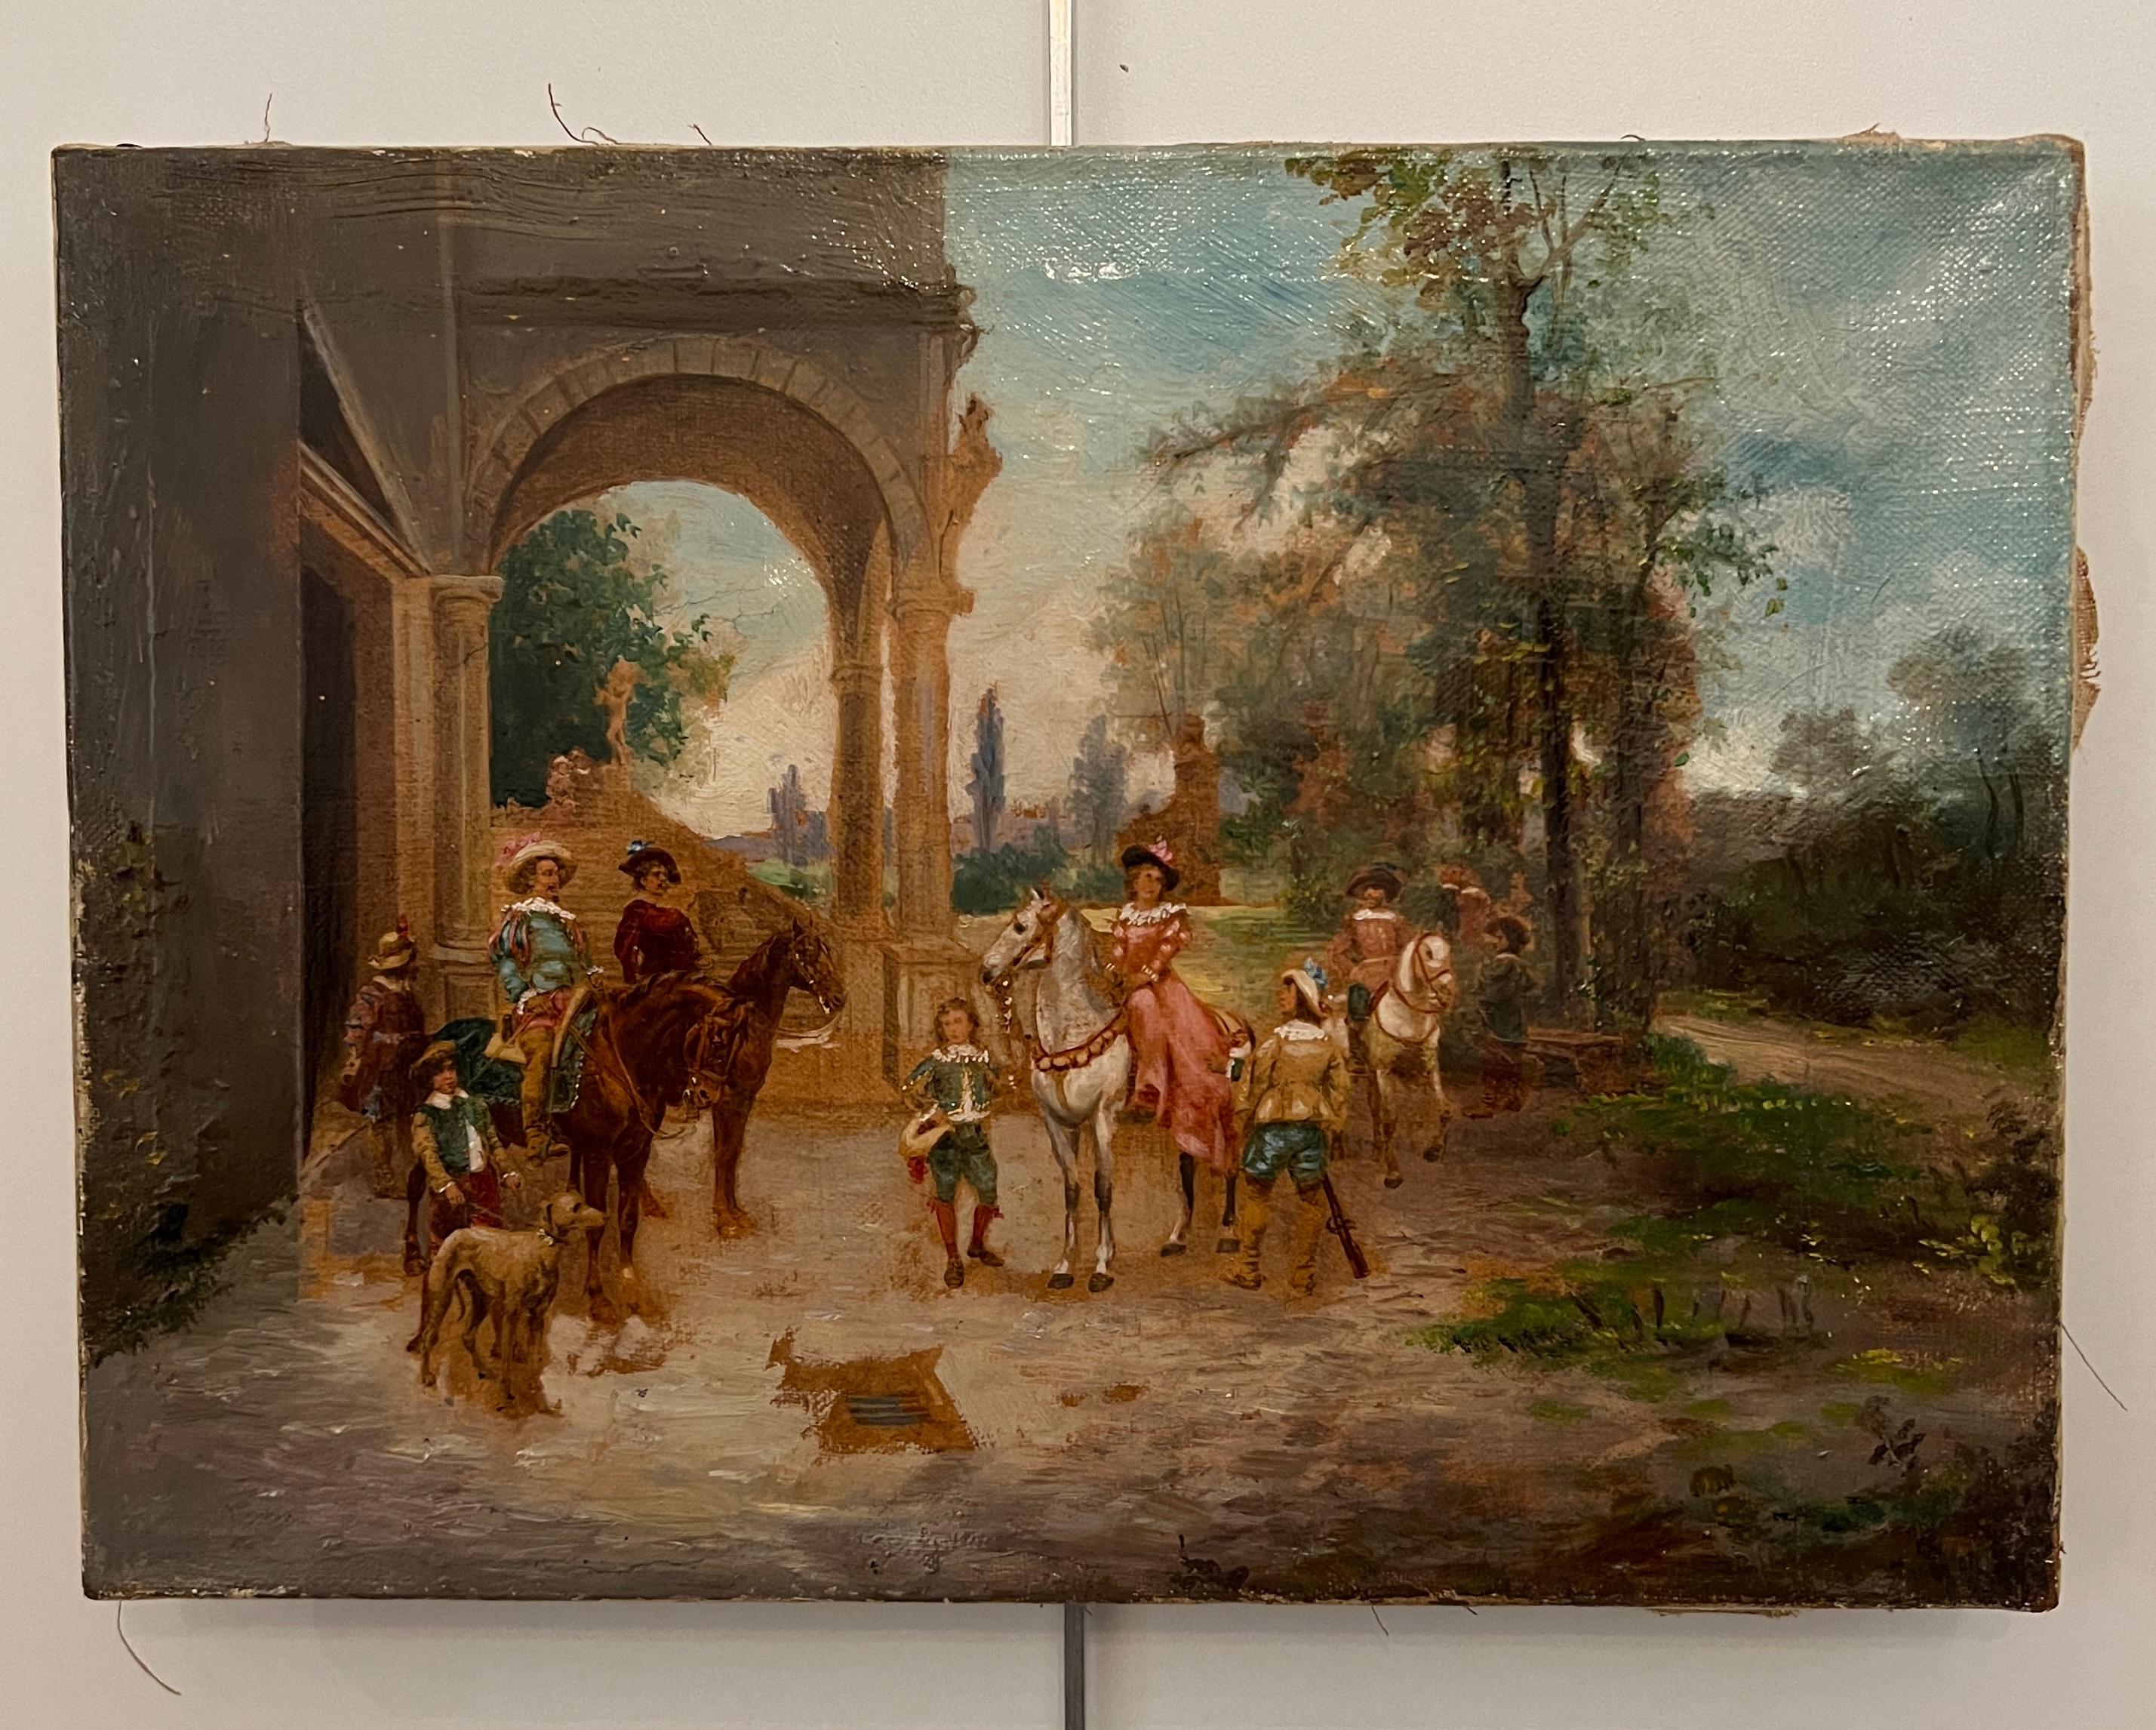 Landscape with riders and figures - Painting by Unknown